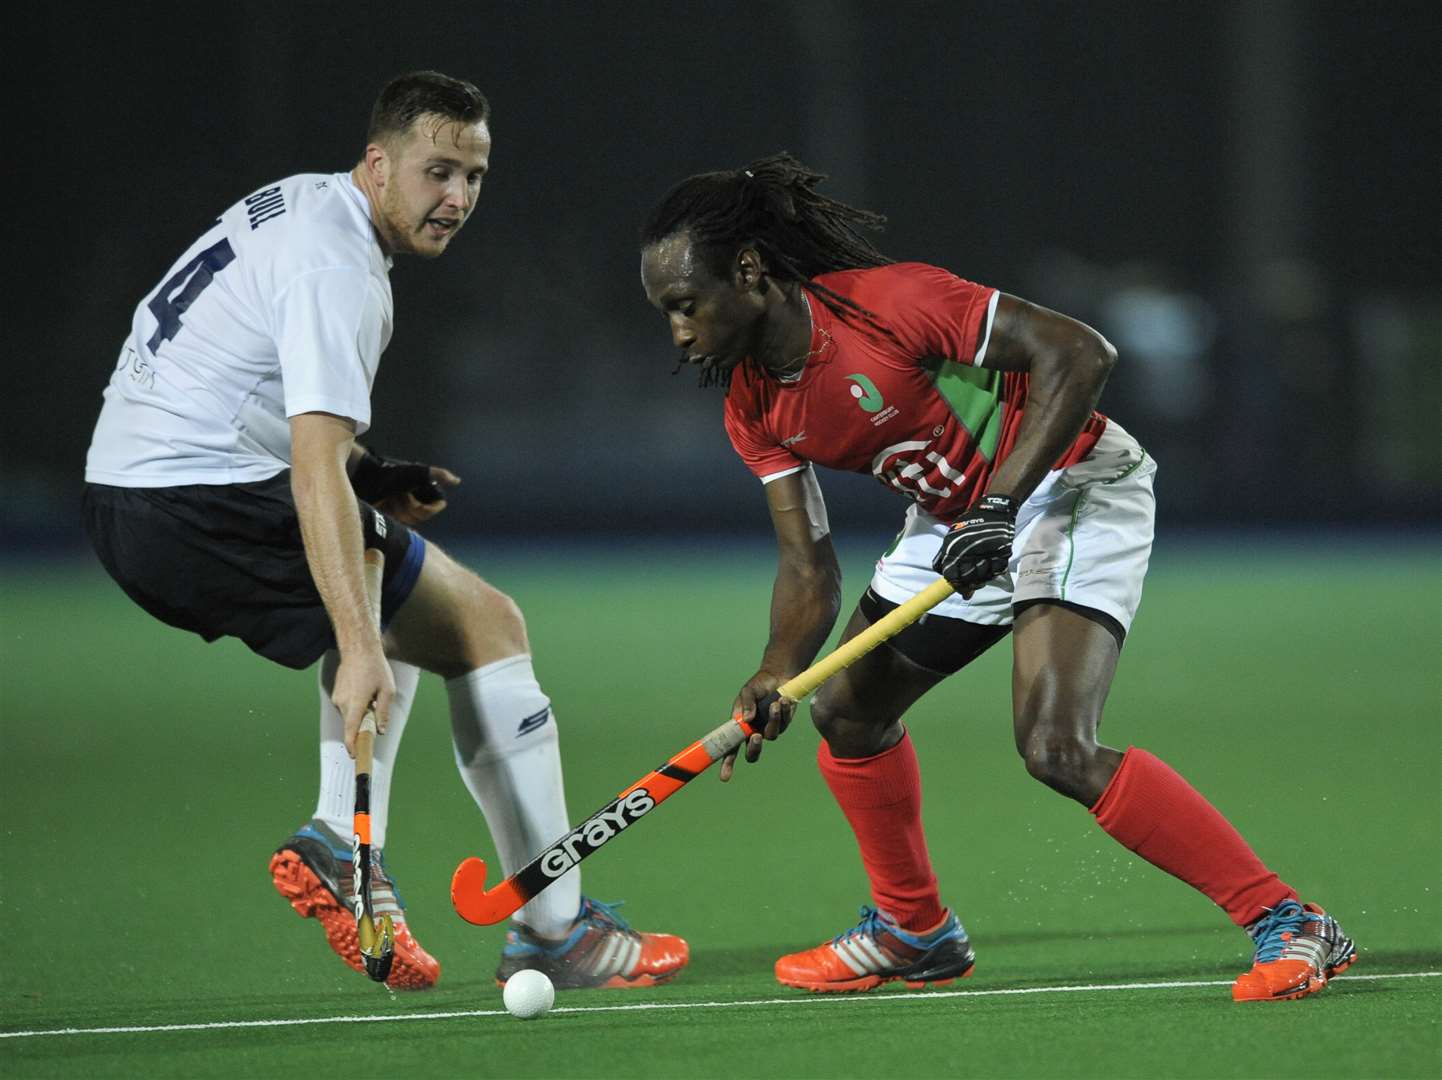 Canterbury's Kwan Browne evades East Grinstead's Andy Bull on Saturday night. Picture: Ady Kerry